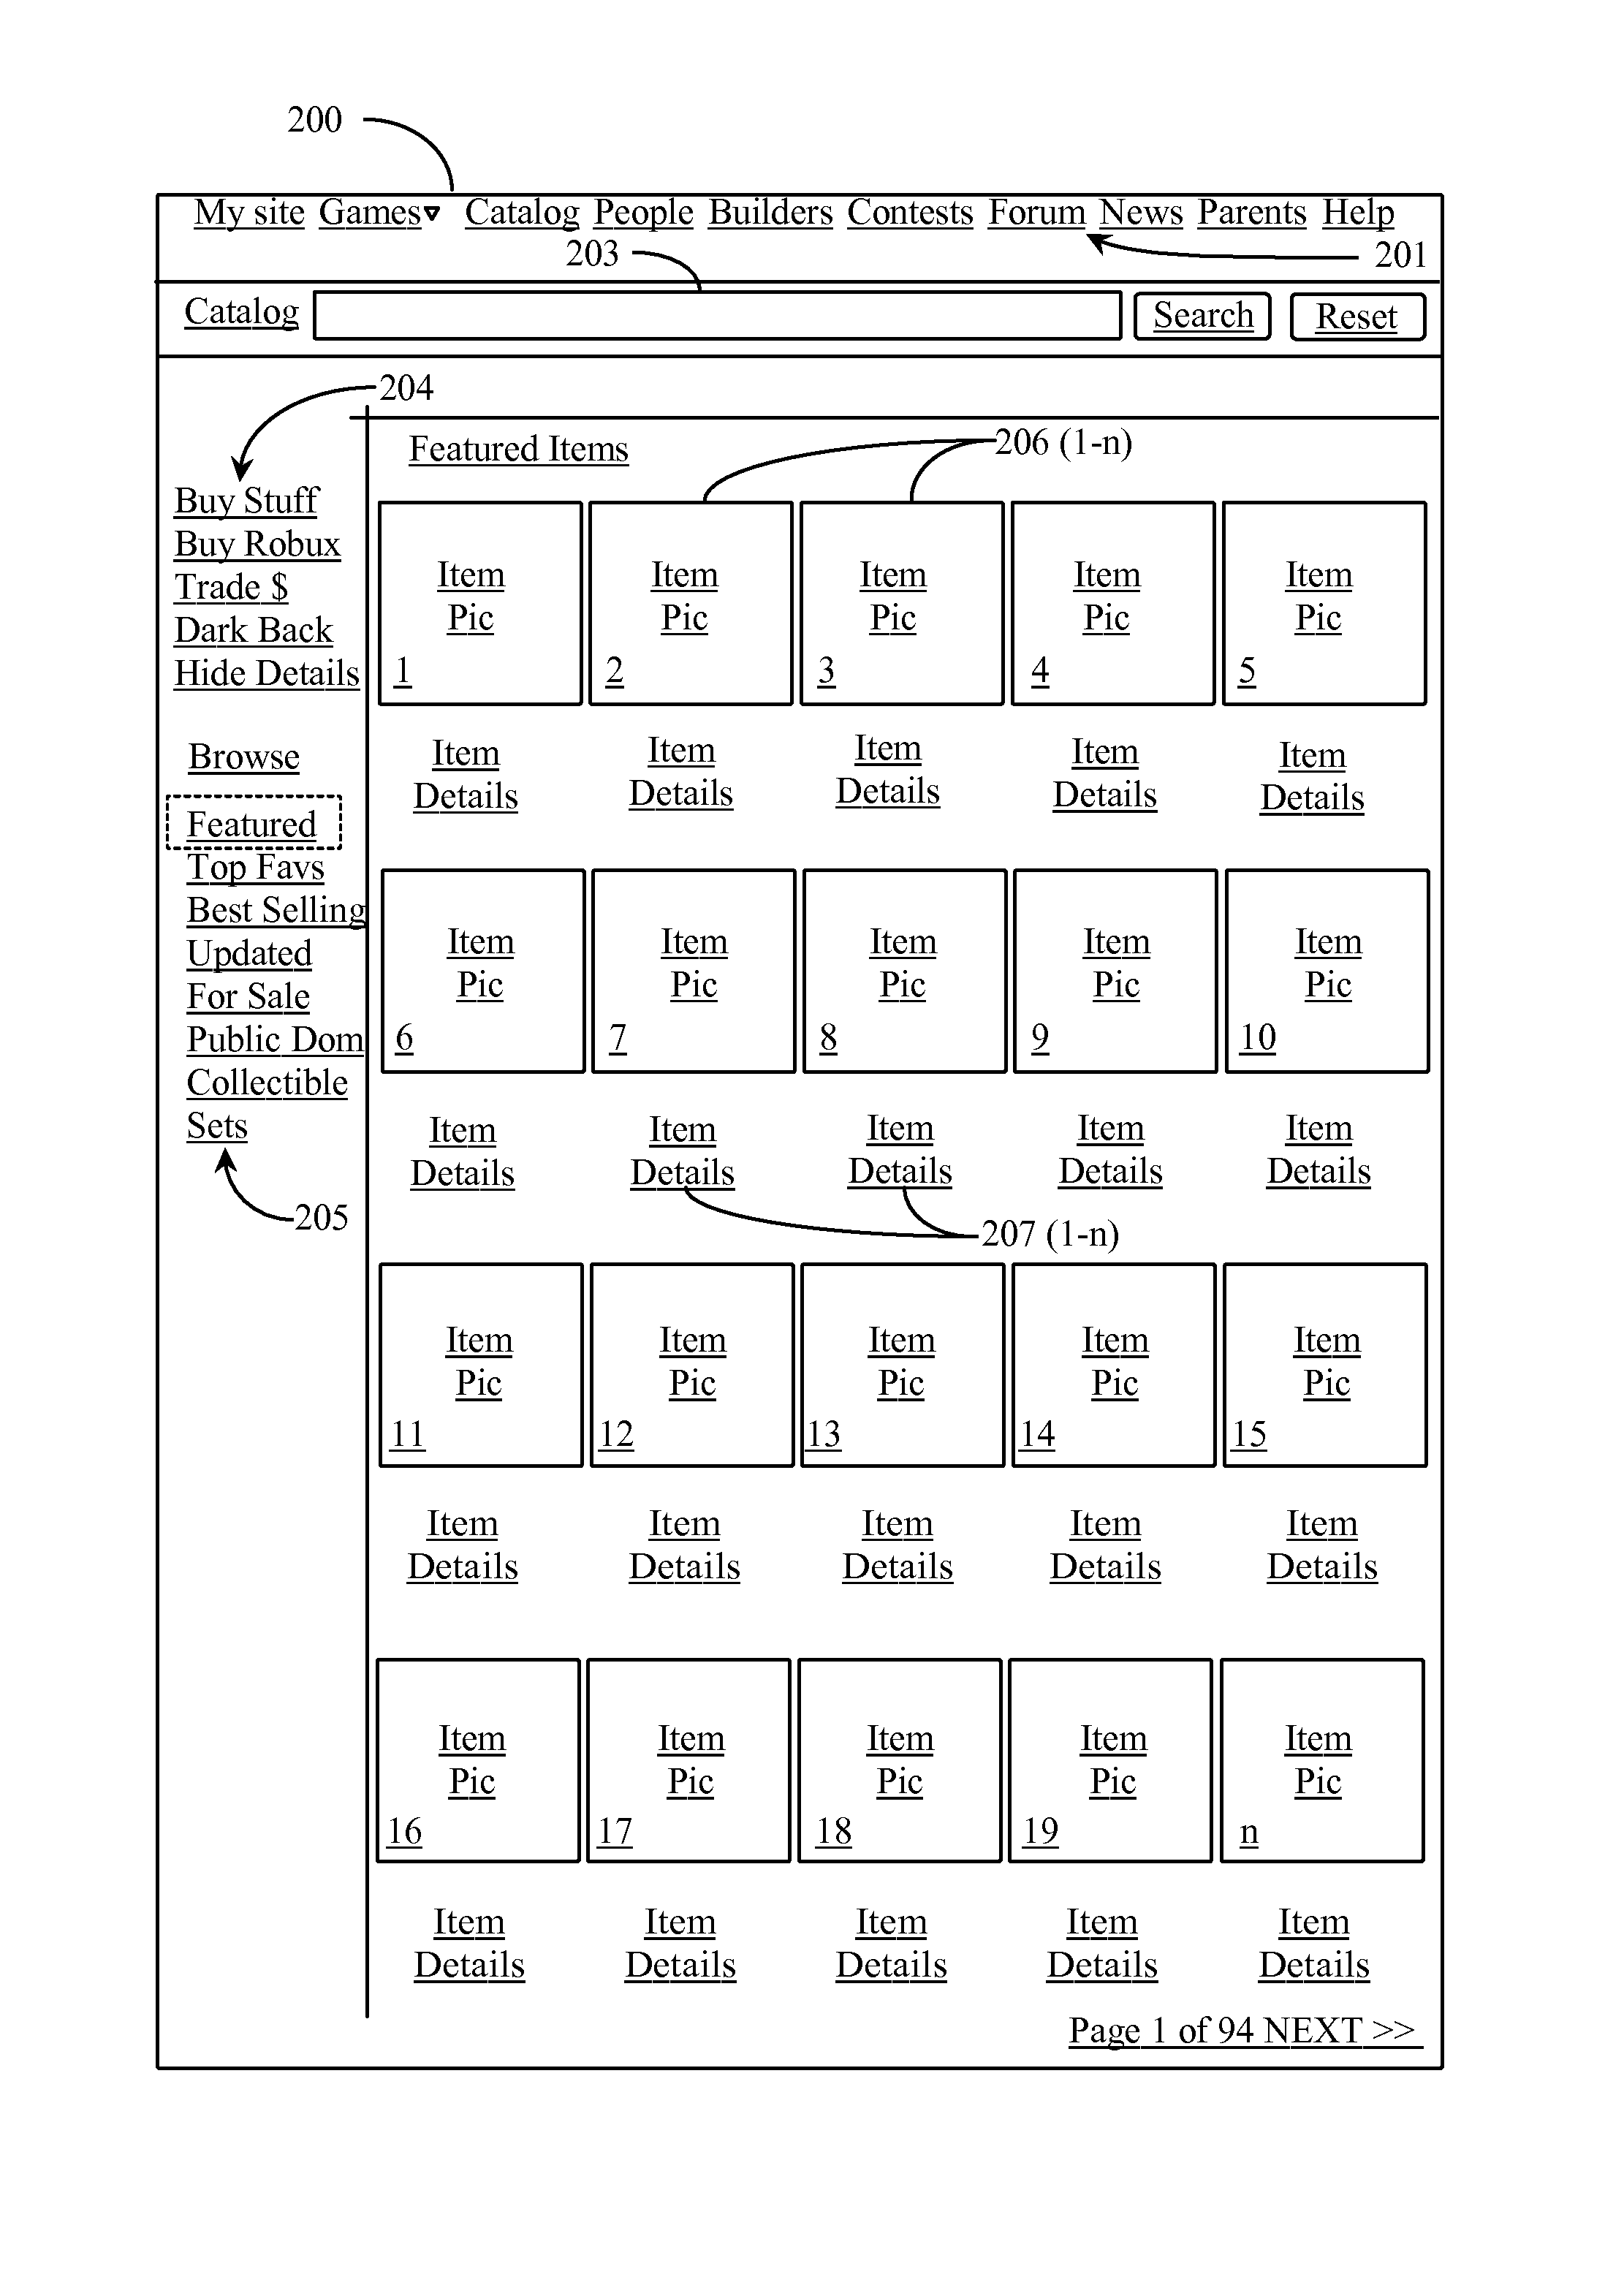 Method for Sorting and Displaying Items in a Virtual Catalog